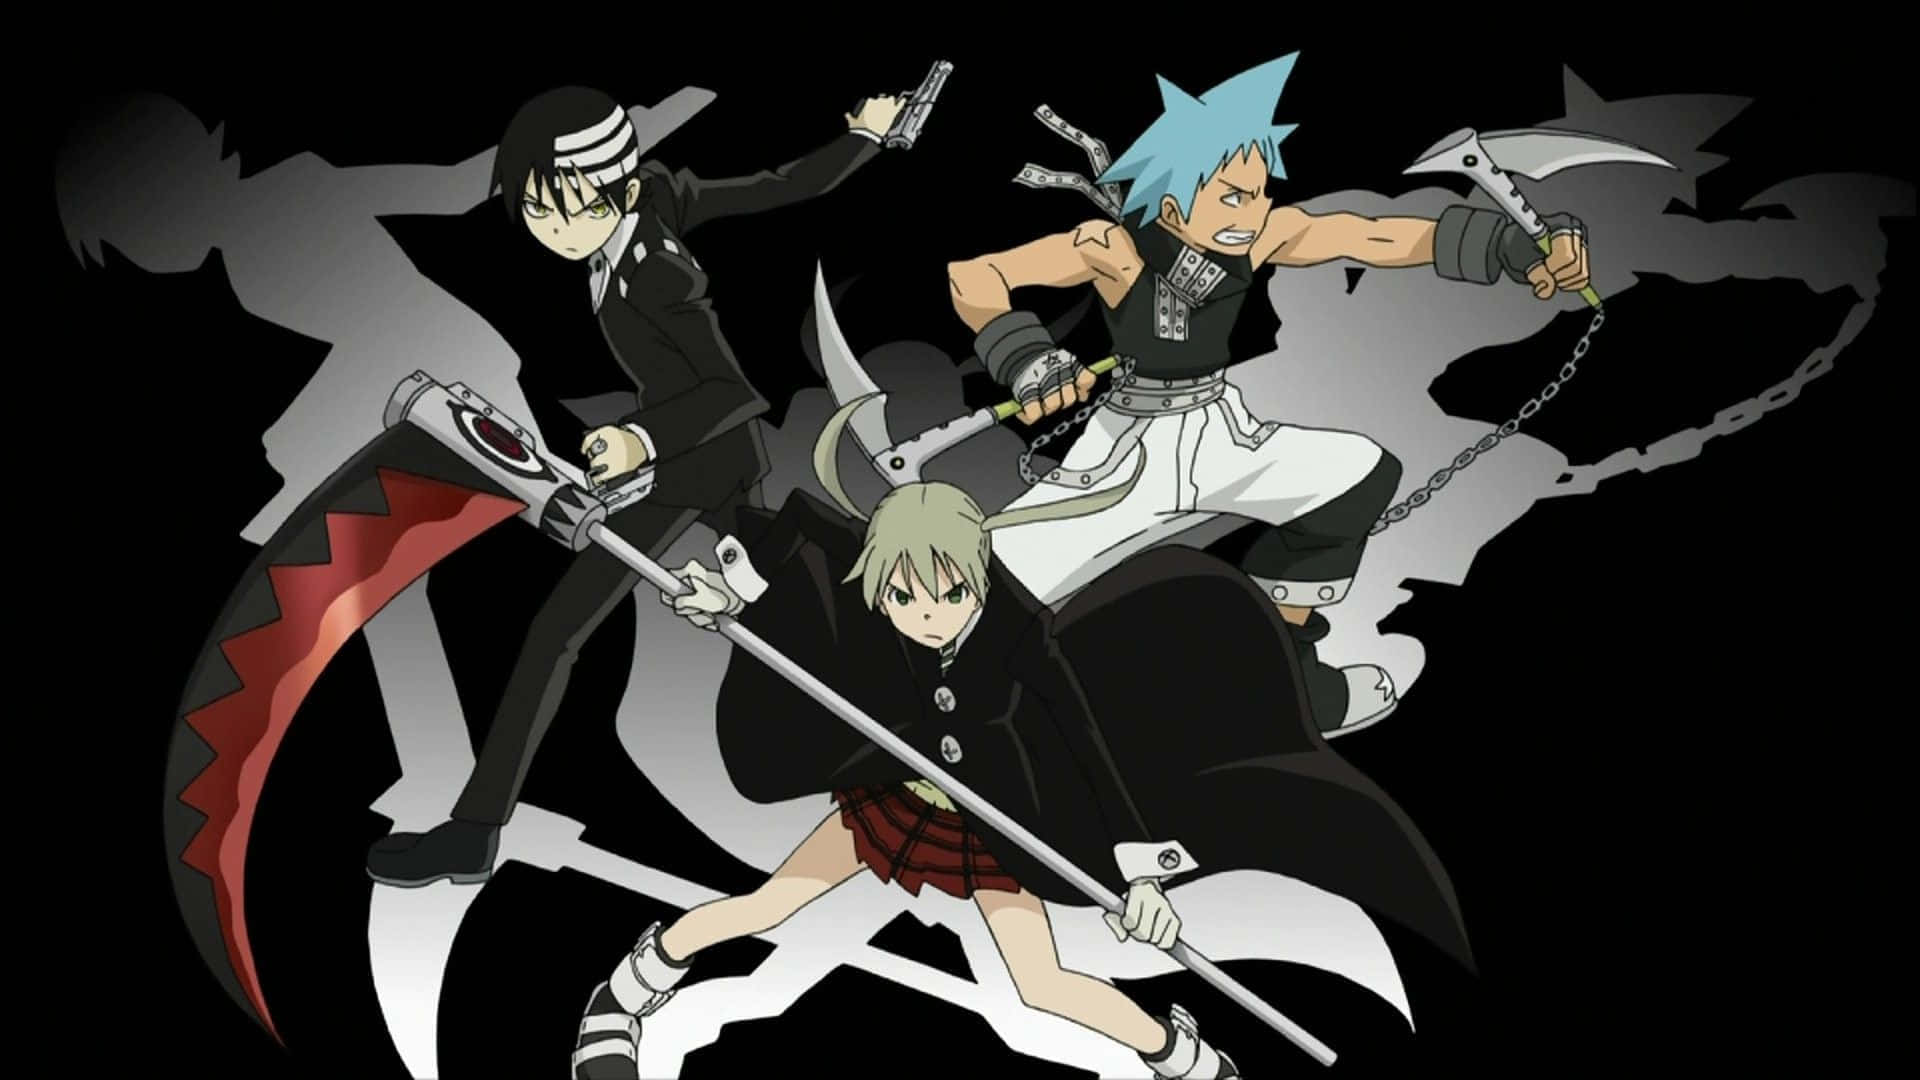 Join Maka and Soul in the World of Soul Eater